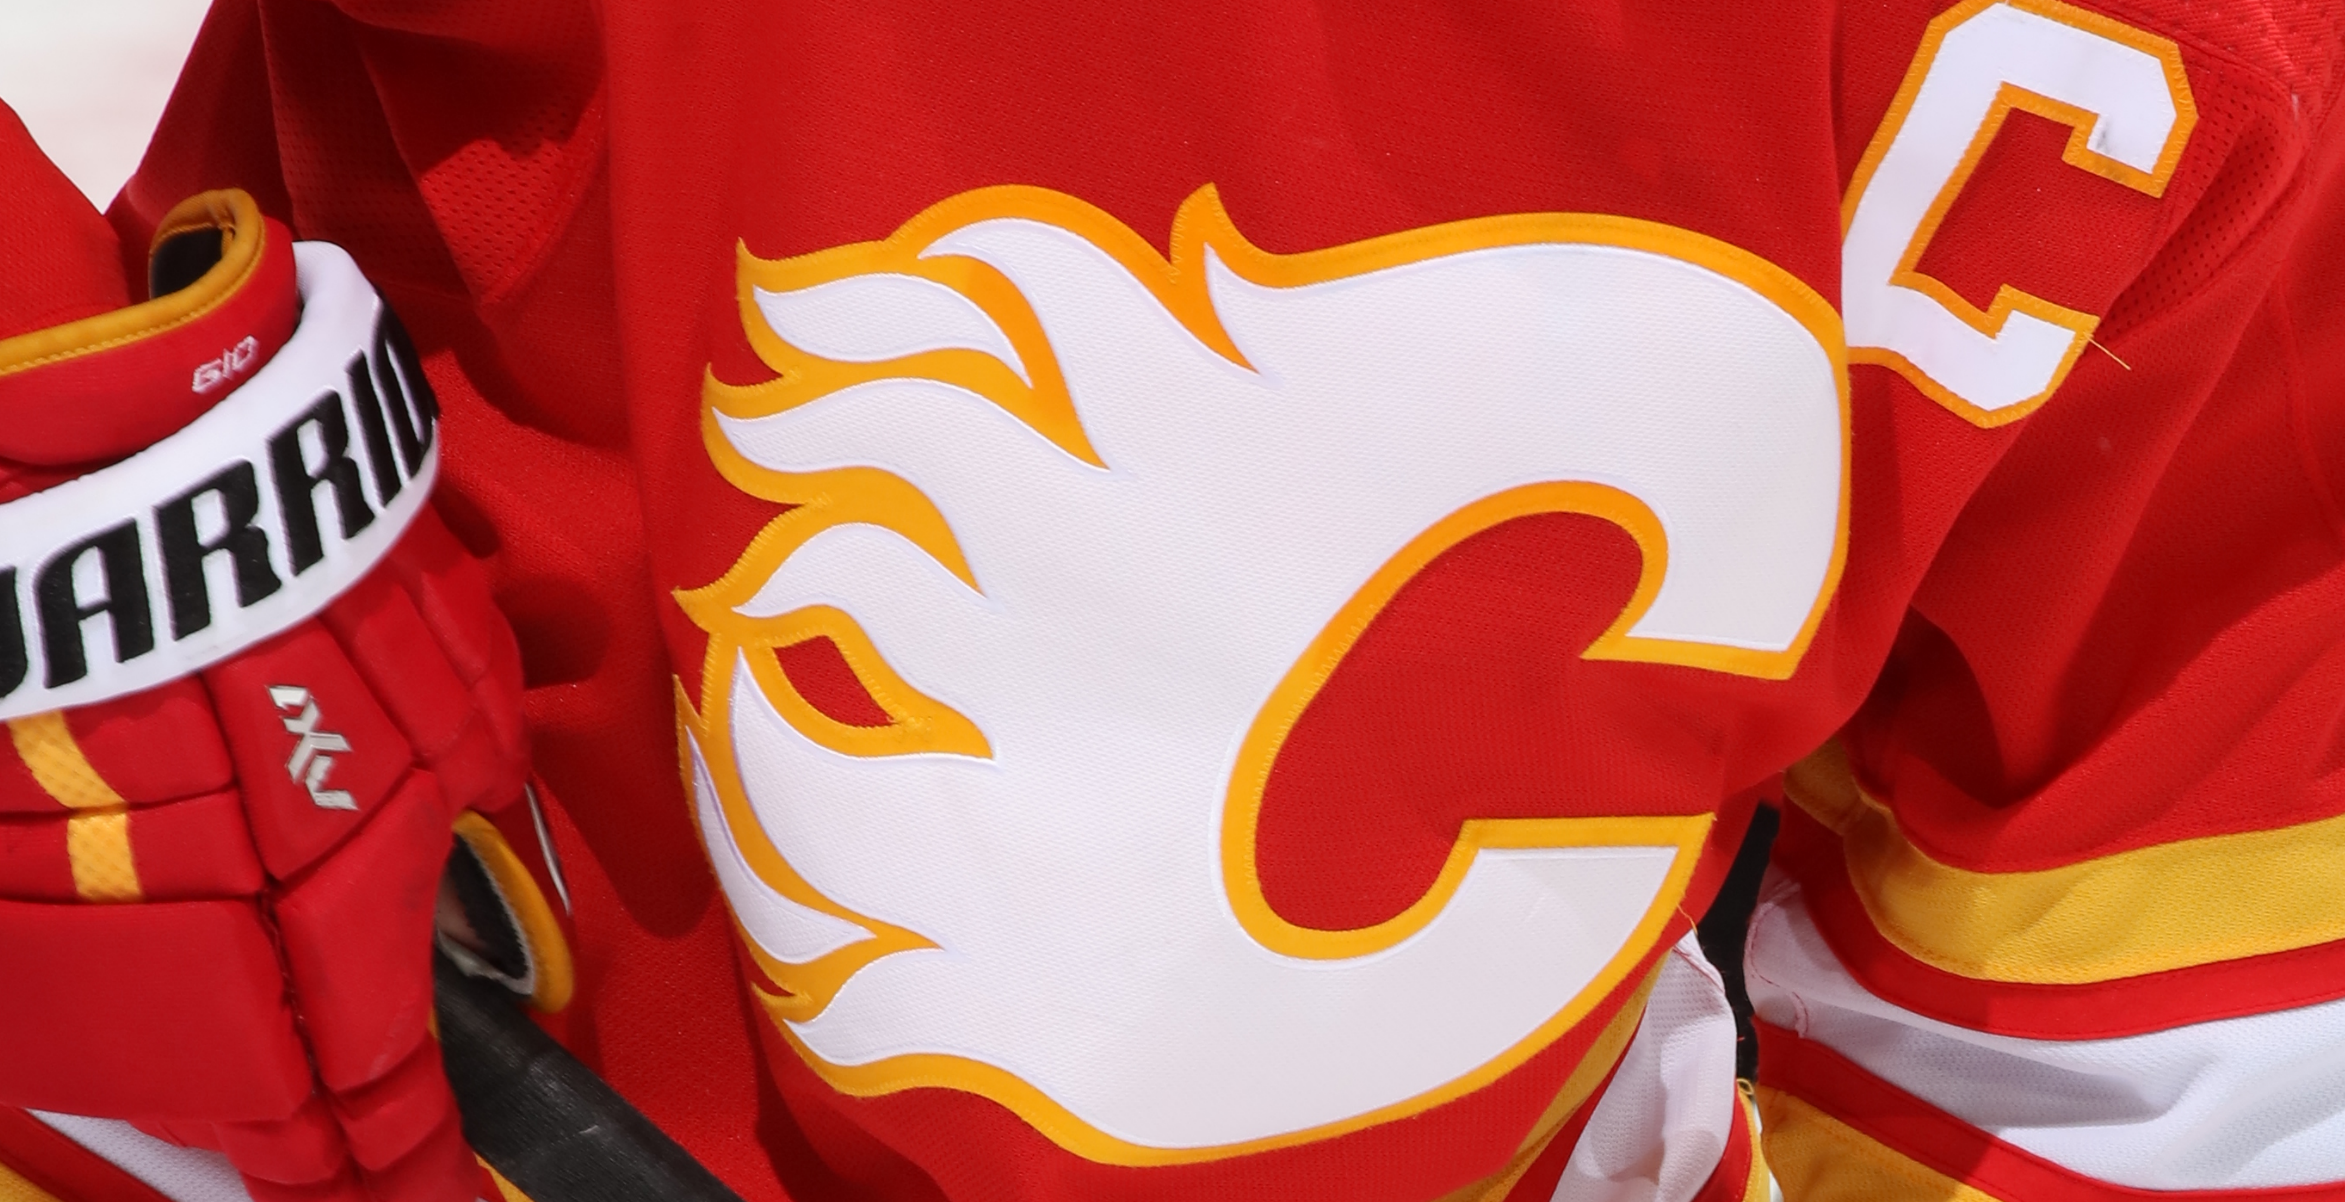 The Jersey History of the Calgary Flames 